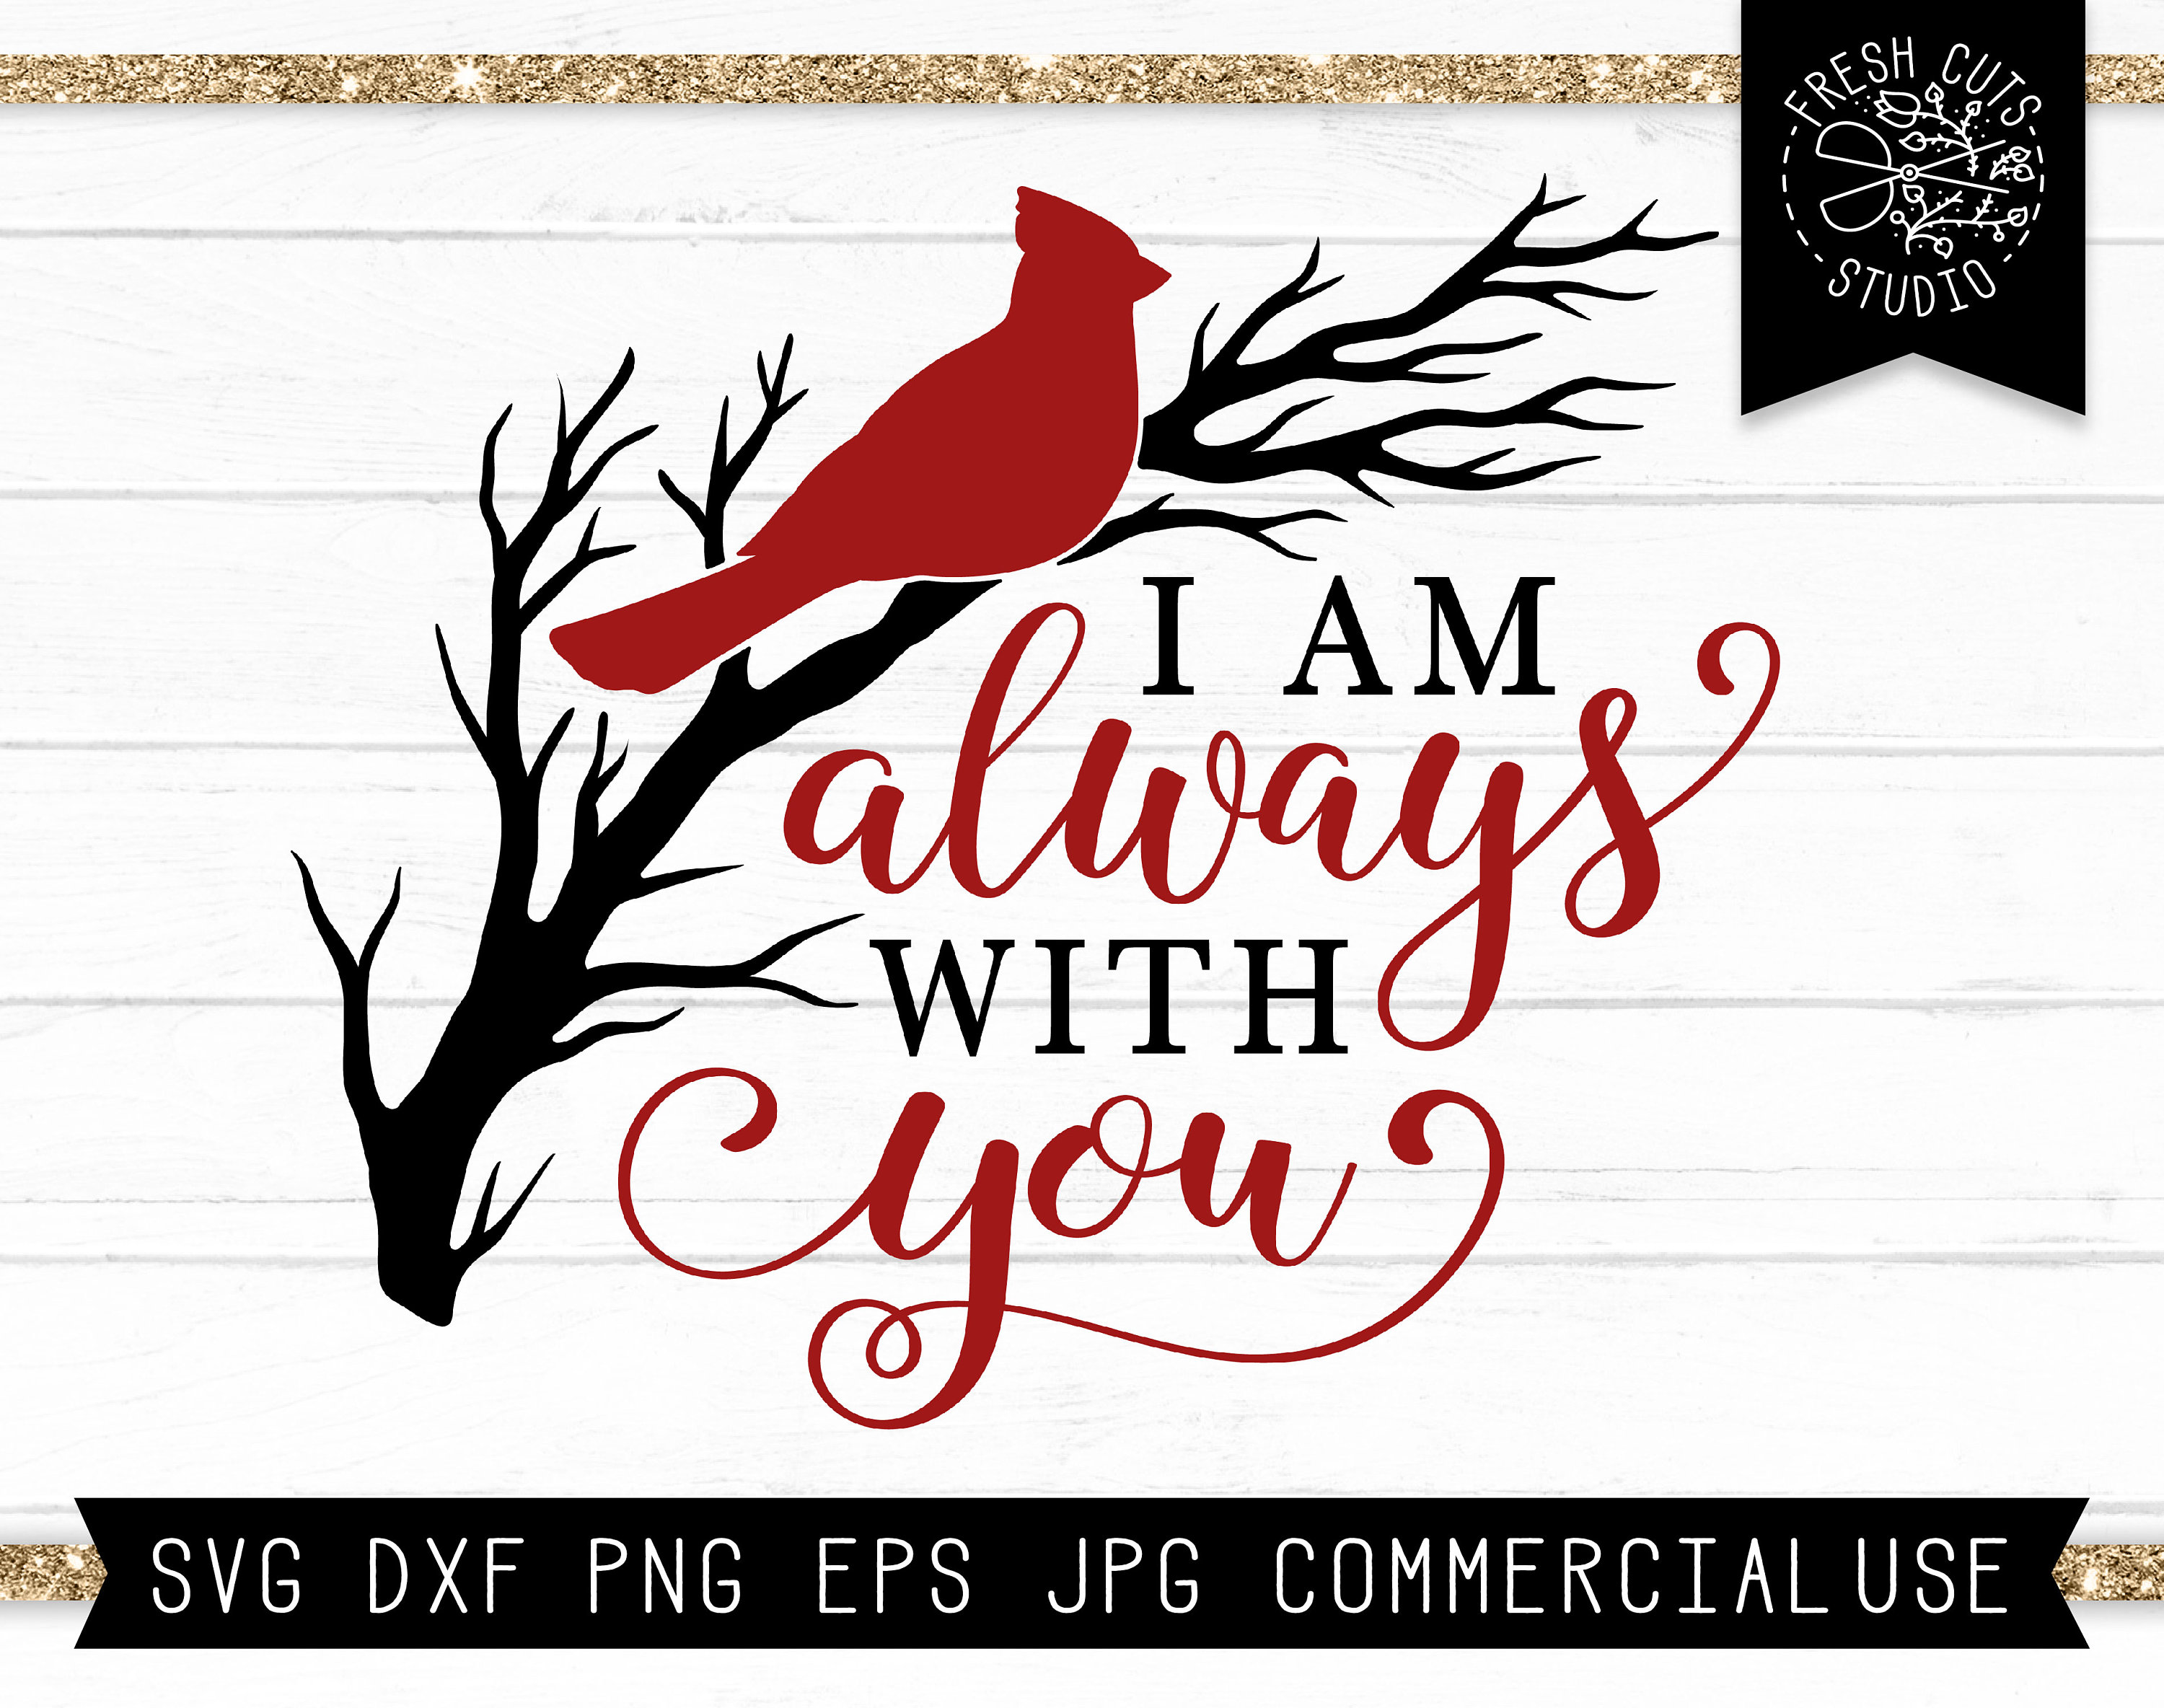 I’m always with you sweet cardinal decal for loved ones in remembrance